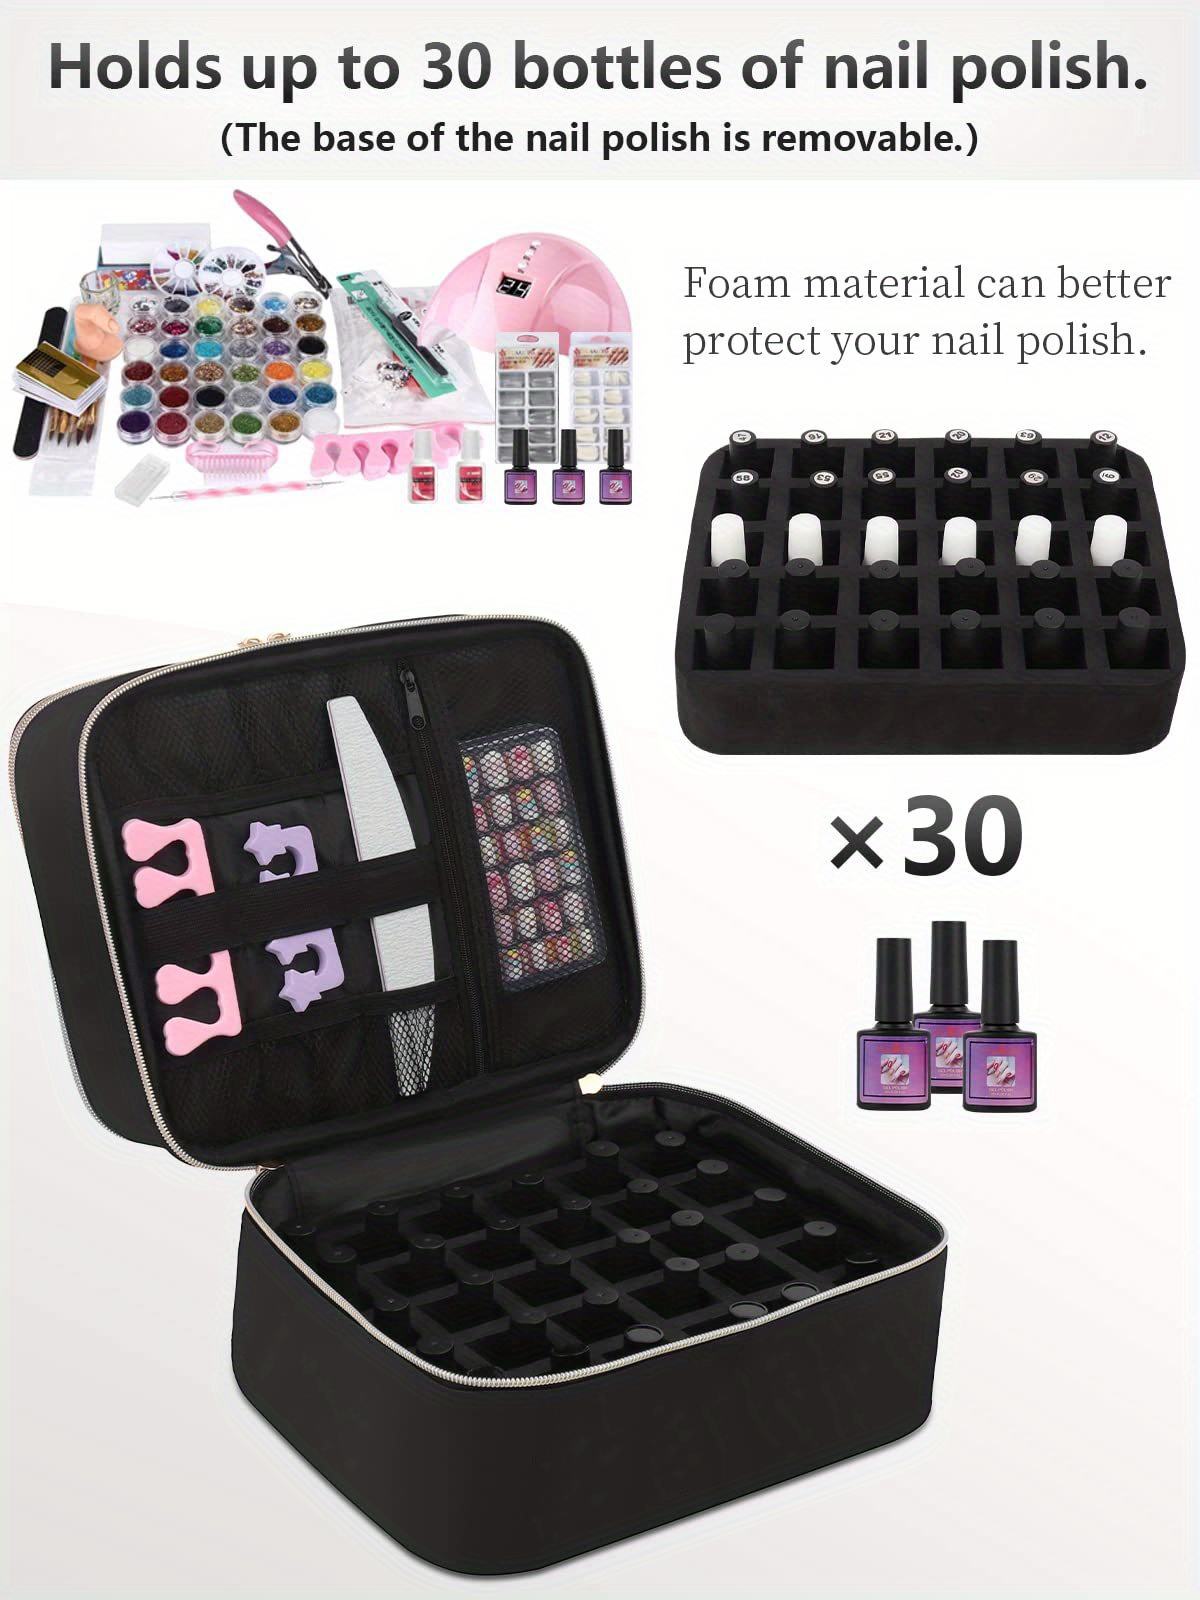 LUXJA Nail Polish Carrying Case - Holds 30 Bottles (15ml - 0.5 fl.oz),  Double-layer Organizer for Nail Polish and Manicure Set, Pink (Bag Only)